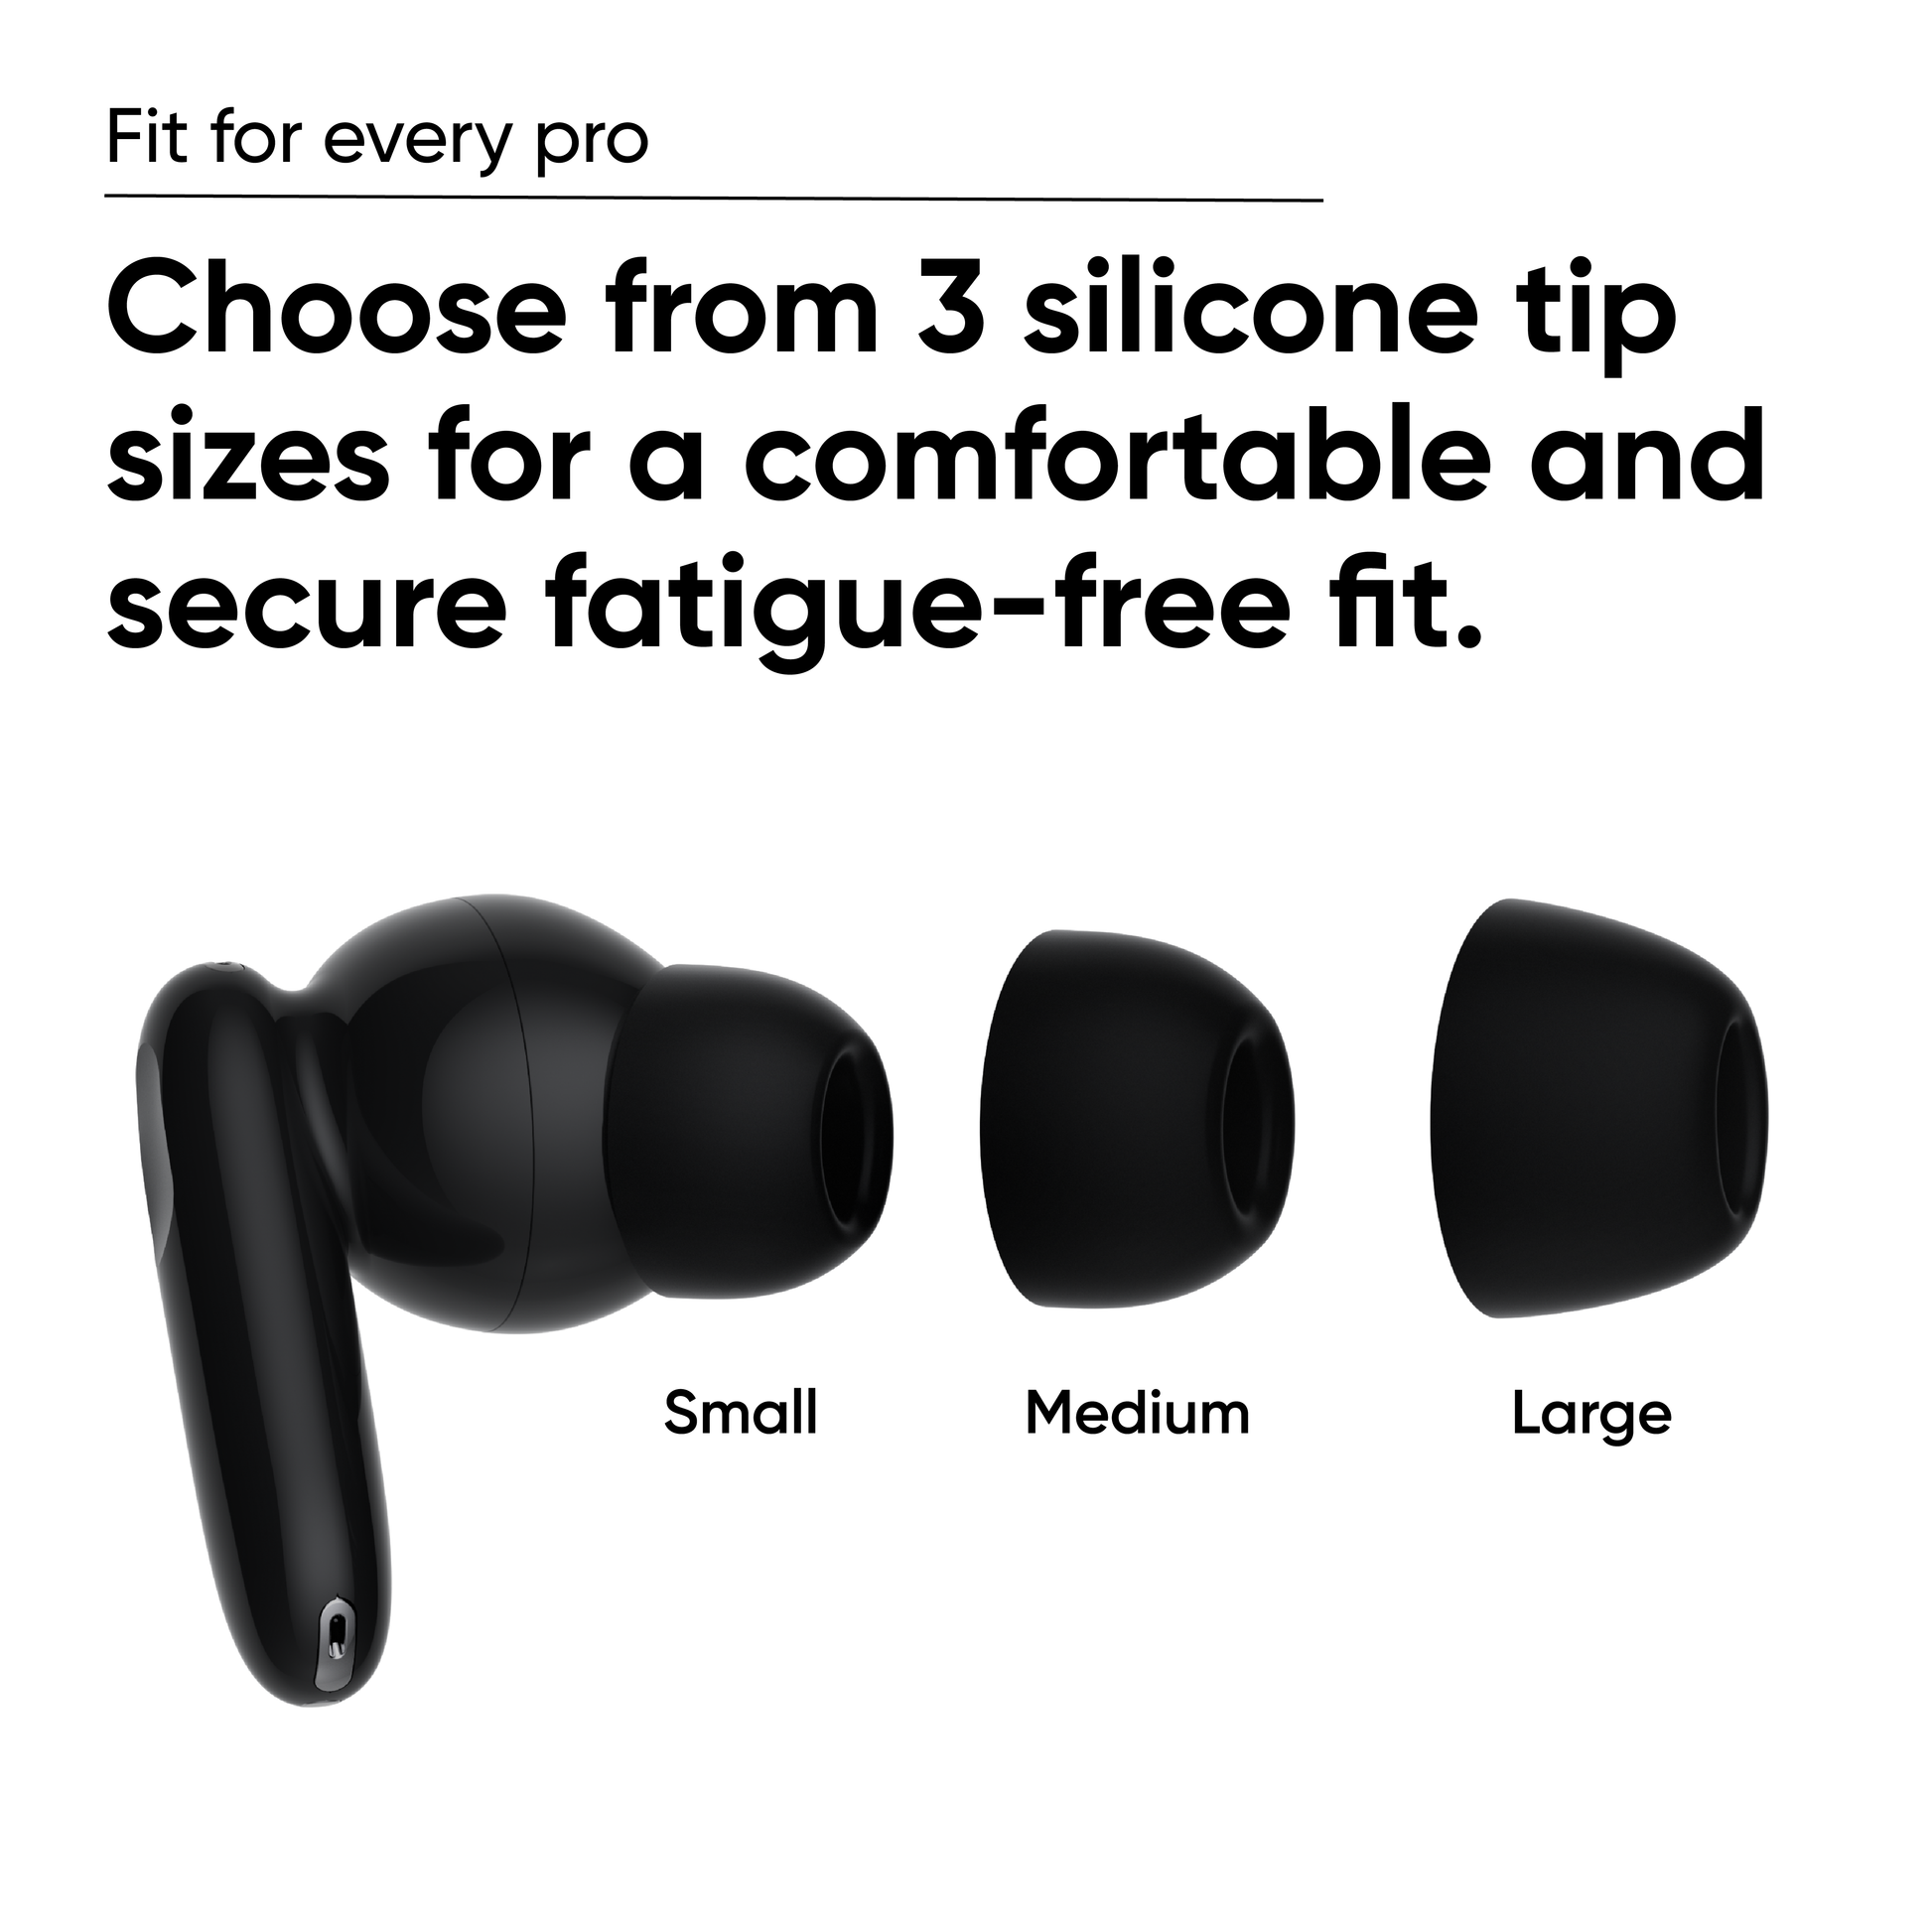 Buds Pro showing interchangeable silicone tips in sizes small, medium and large. Text overlay says, "Choose from 3 silicon tip sizes for a comfortable and secure fatigue free fit."